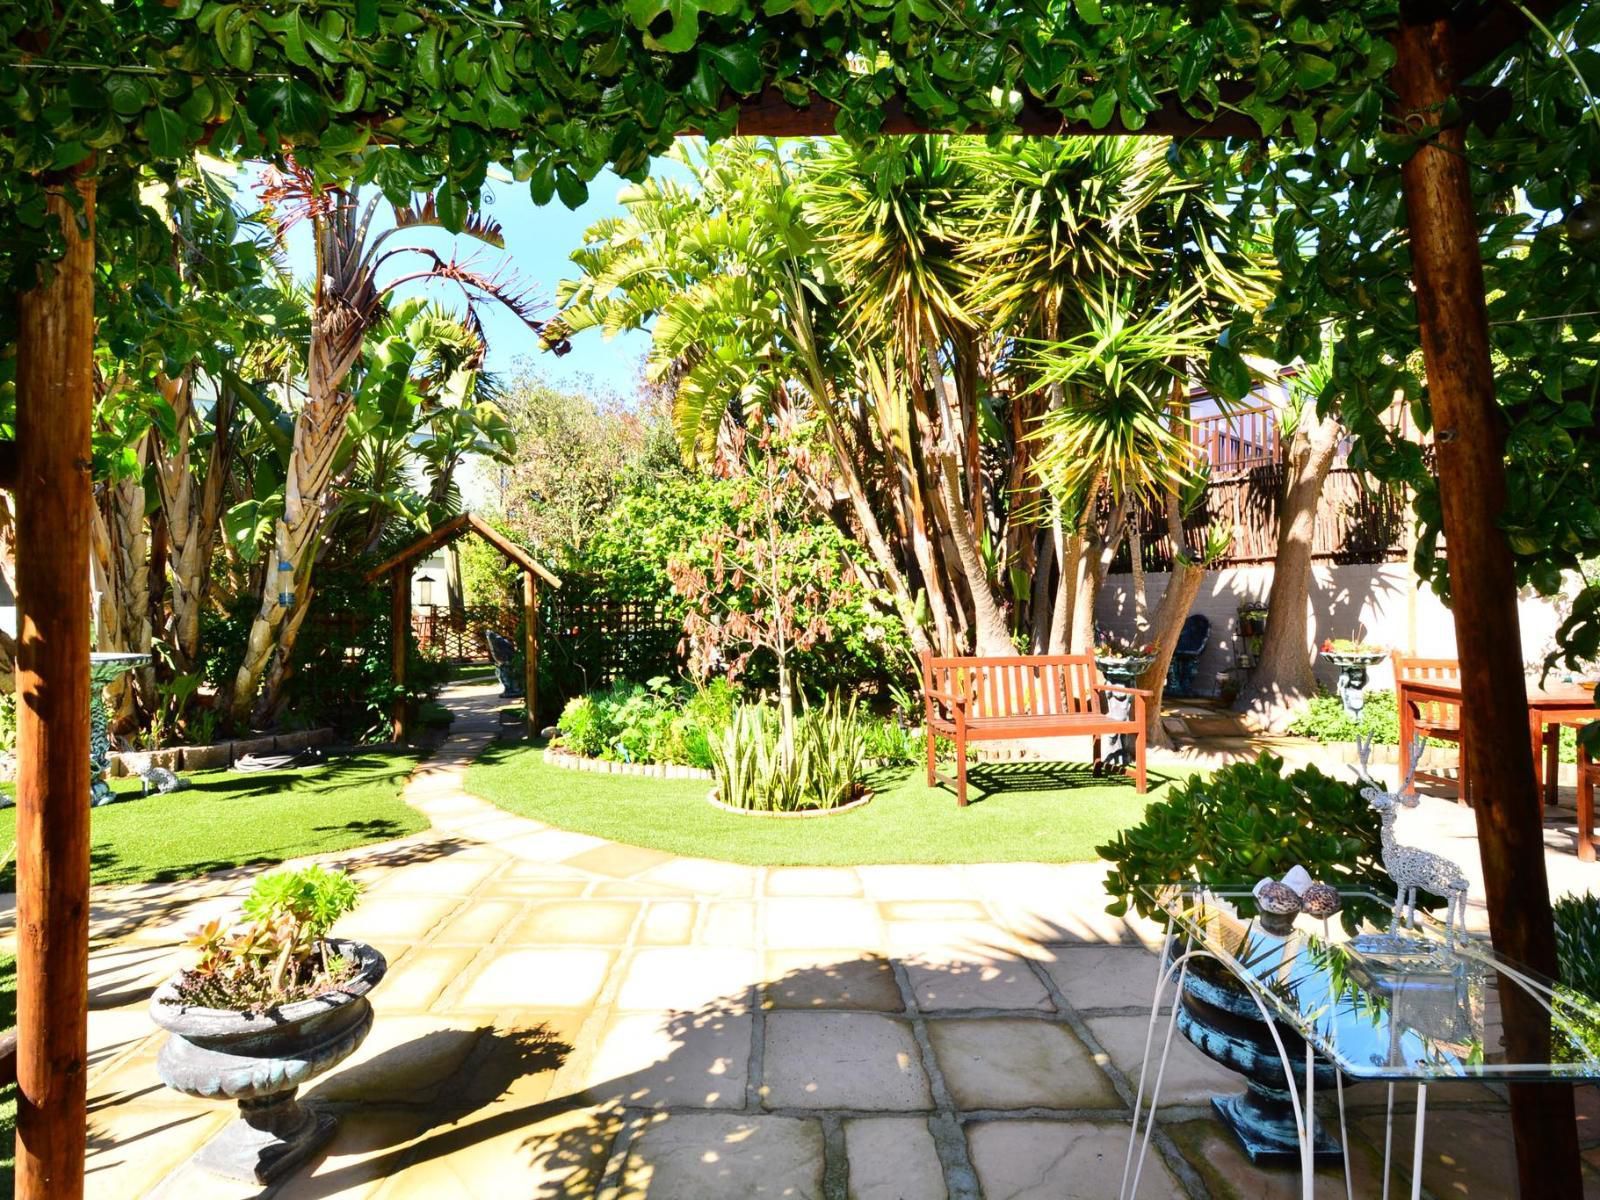 Secret Garden Guesthouse Bloubergstrand Blouberg Western Cape South Africa House, Building, Architecture, Palm Tree, Plant, Nature, Wood, Garden